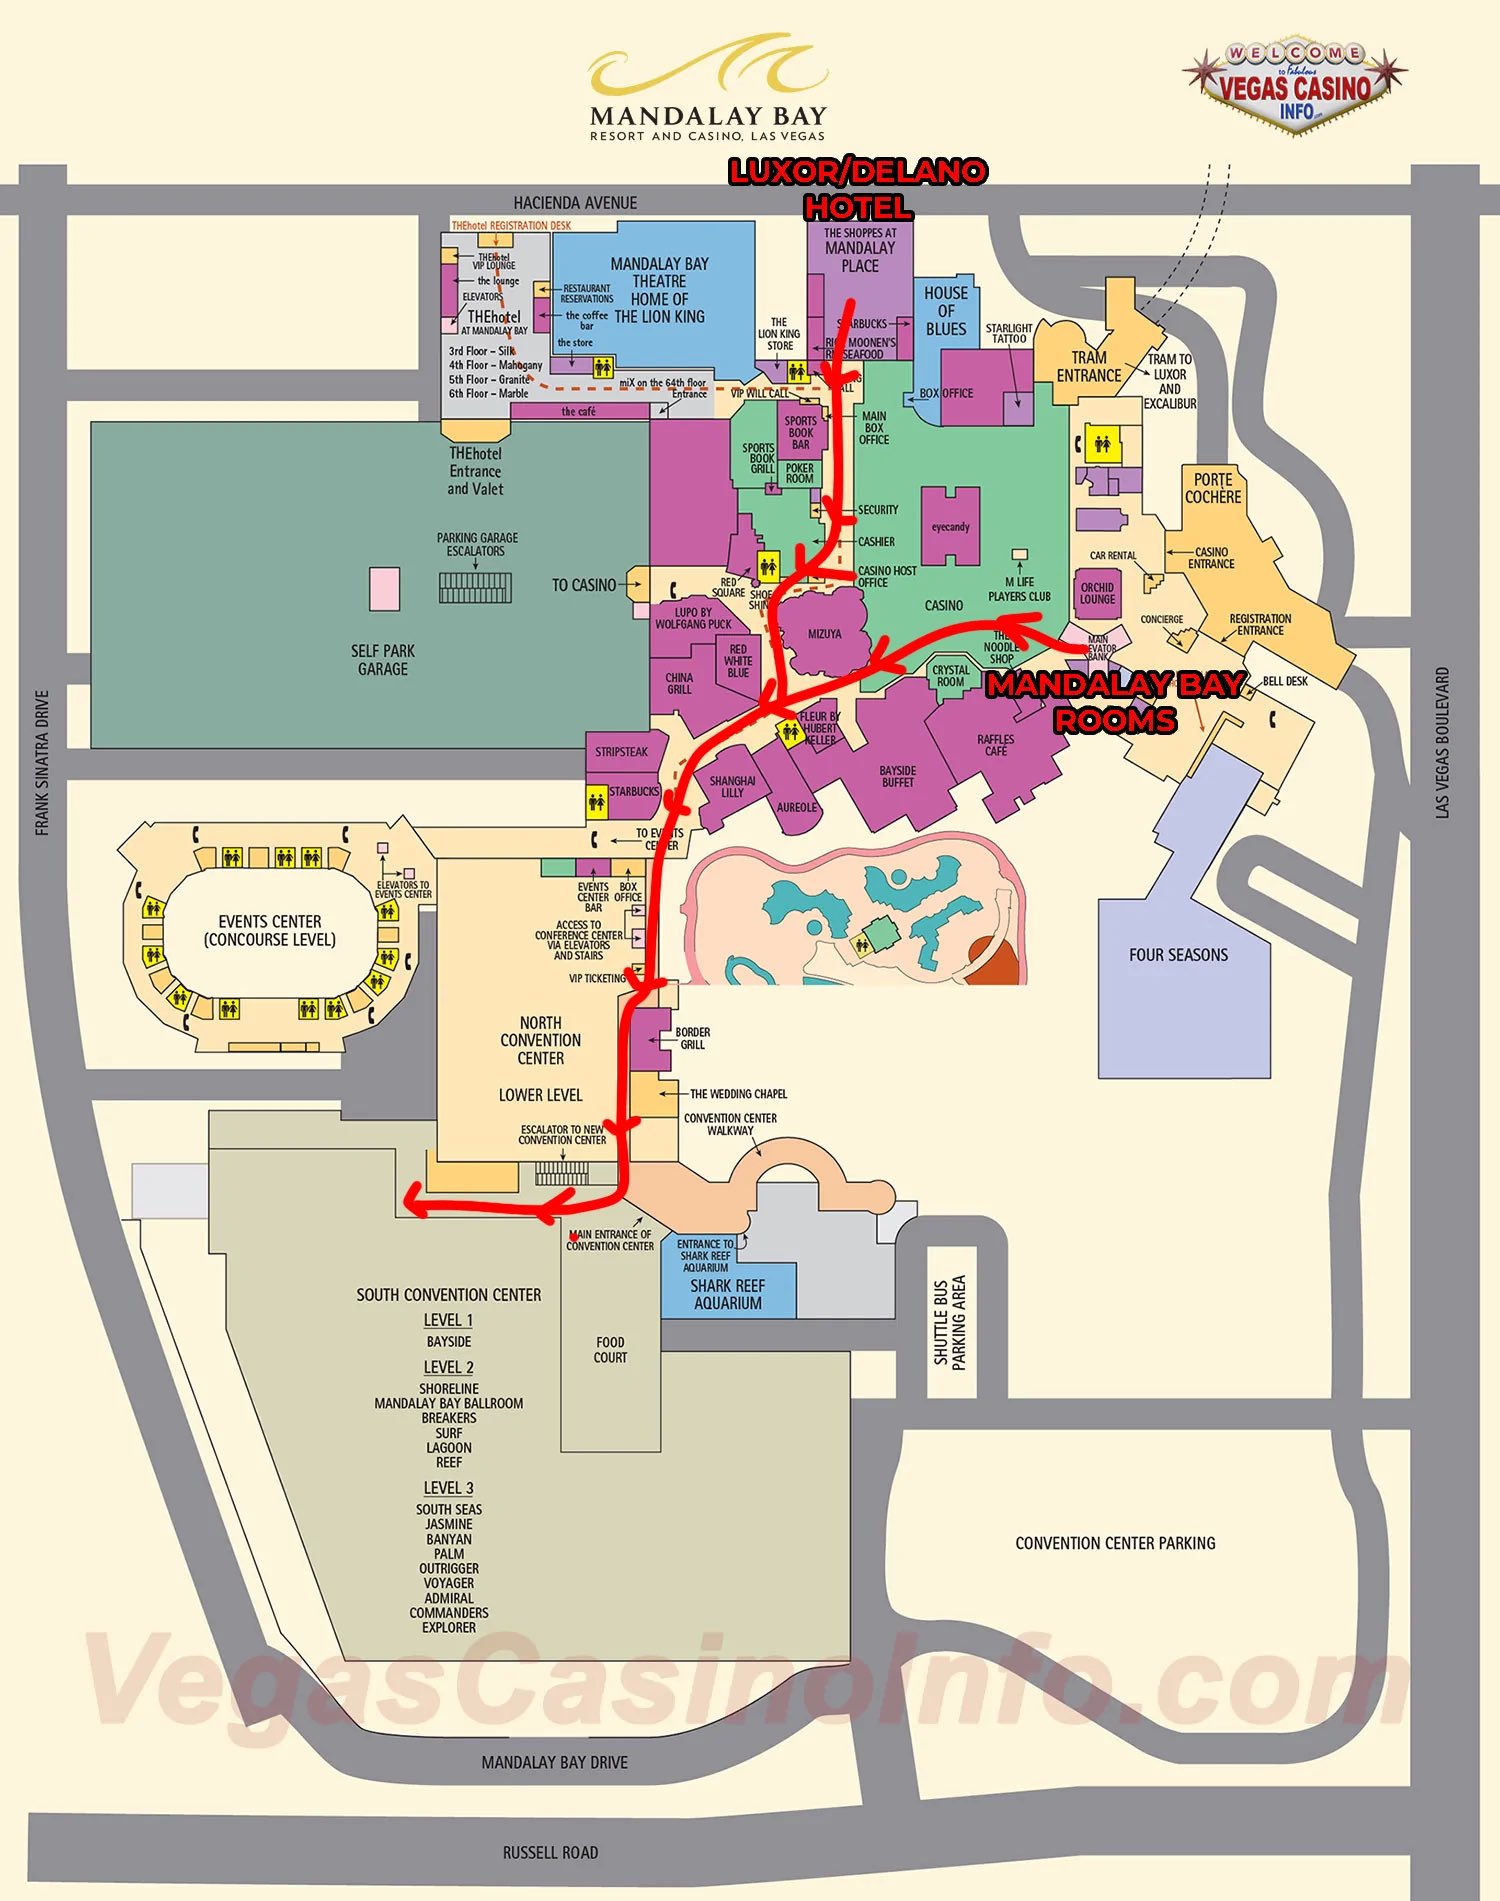 Sherry Nhan @First Attack on X: From the article - a map to get to @EVO 's convention  center from Mandalay Bay/Luxor/Delano!  / X